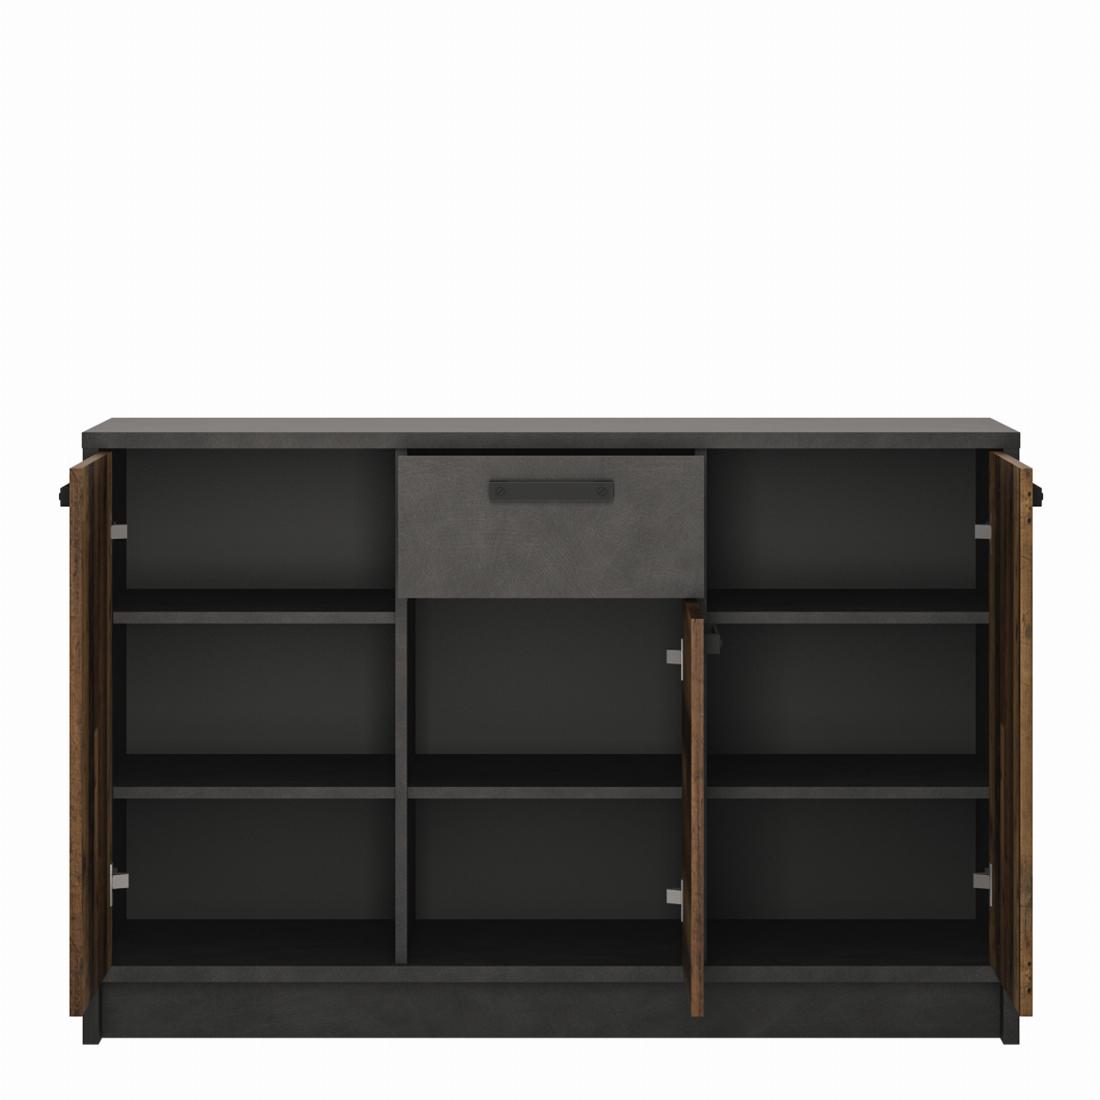 Brooklyn Cabinet with 3 Doors and 1 Drawer in Walnut and Dark Matera Grey